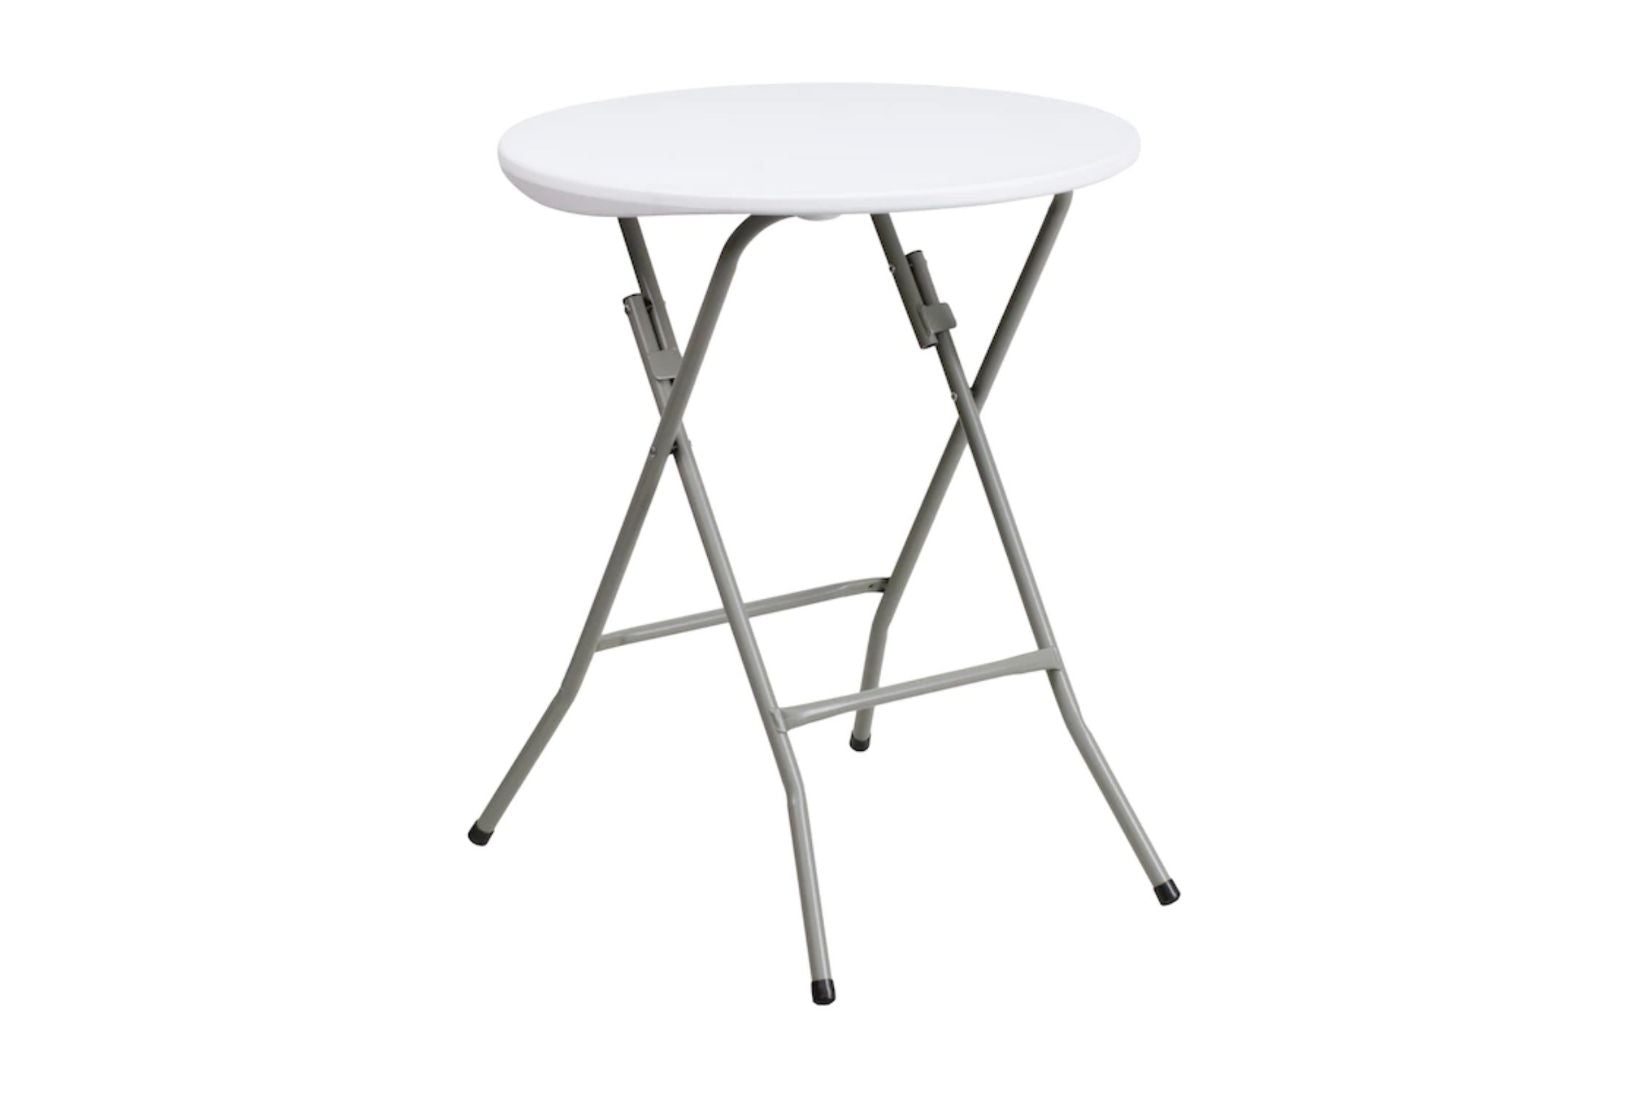 White folding cocktail pub table. Available for rent in Maryland